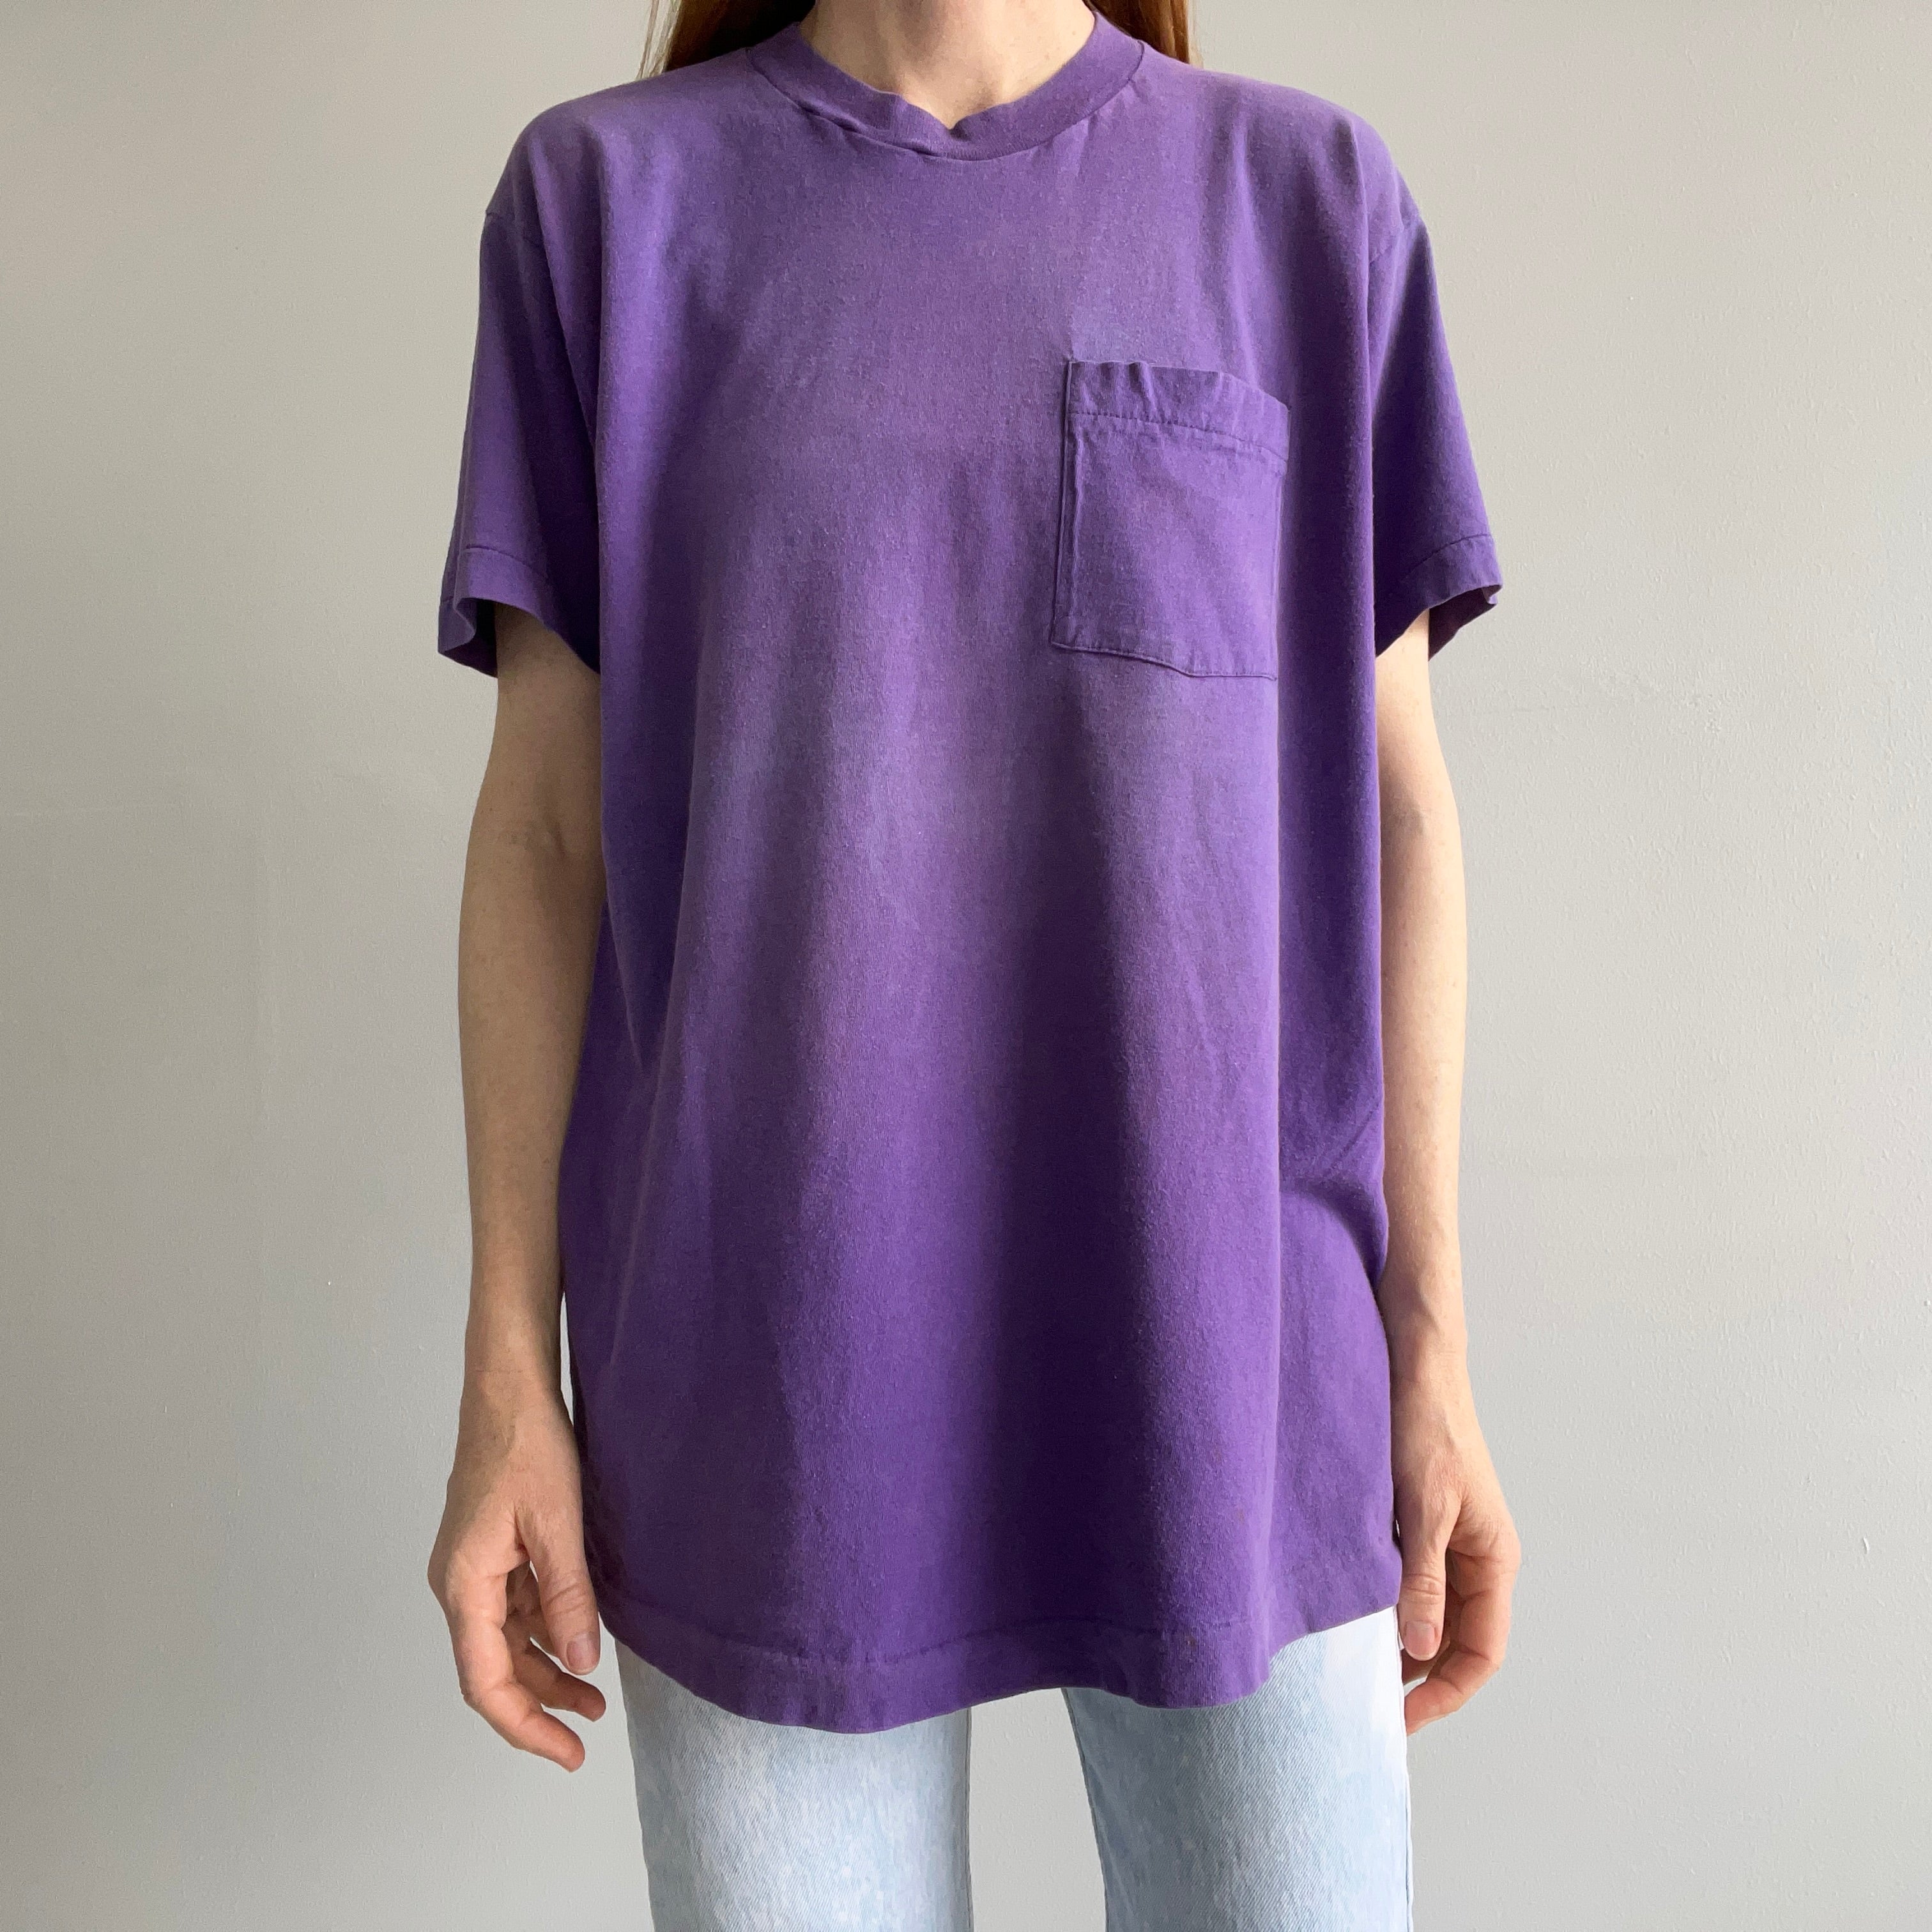 1980s Epically Sun Faded and Worn Blank Purple Pocket T-SHirt